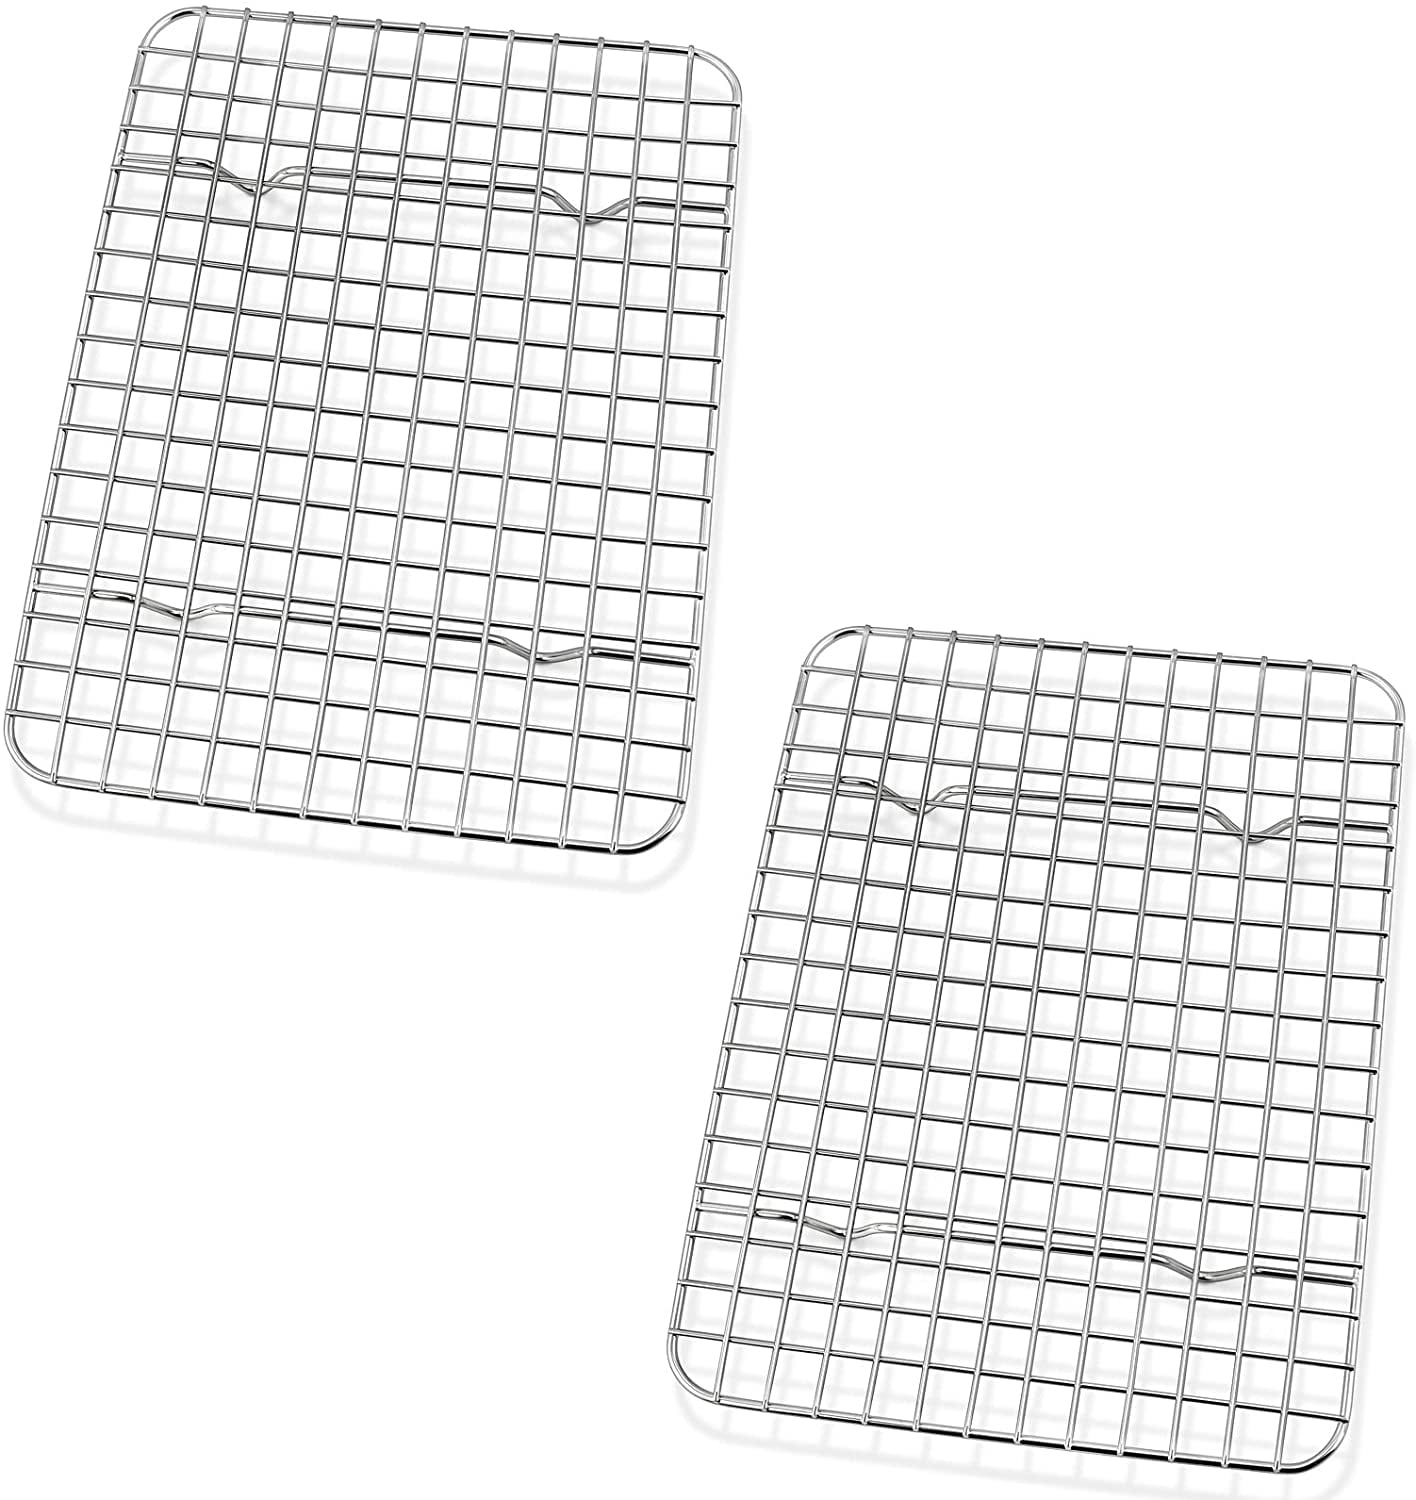 Cooling Rack Set of 2 Stainless Steel Grid Large Baking Oven Rack 16.6